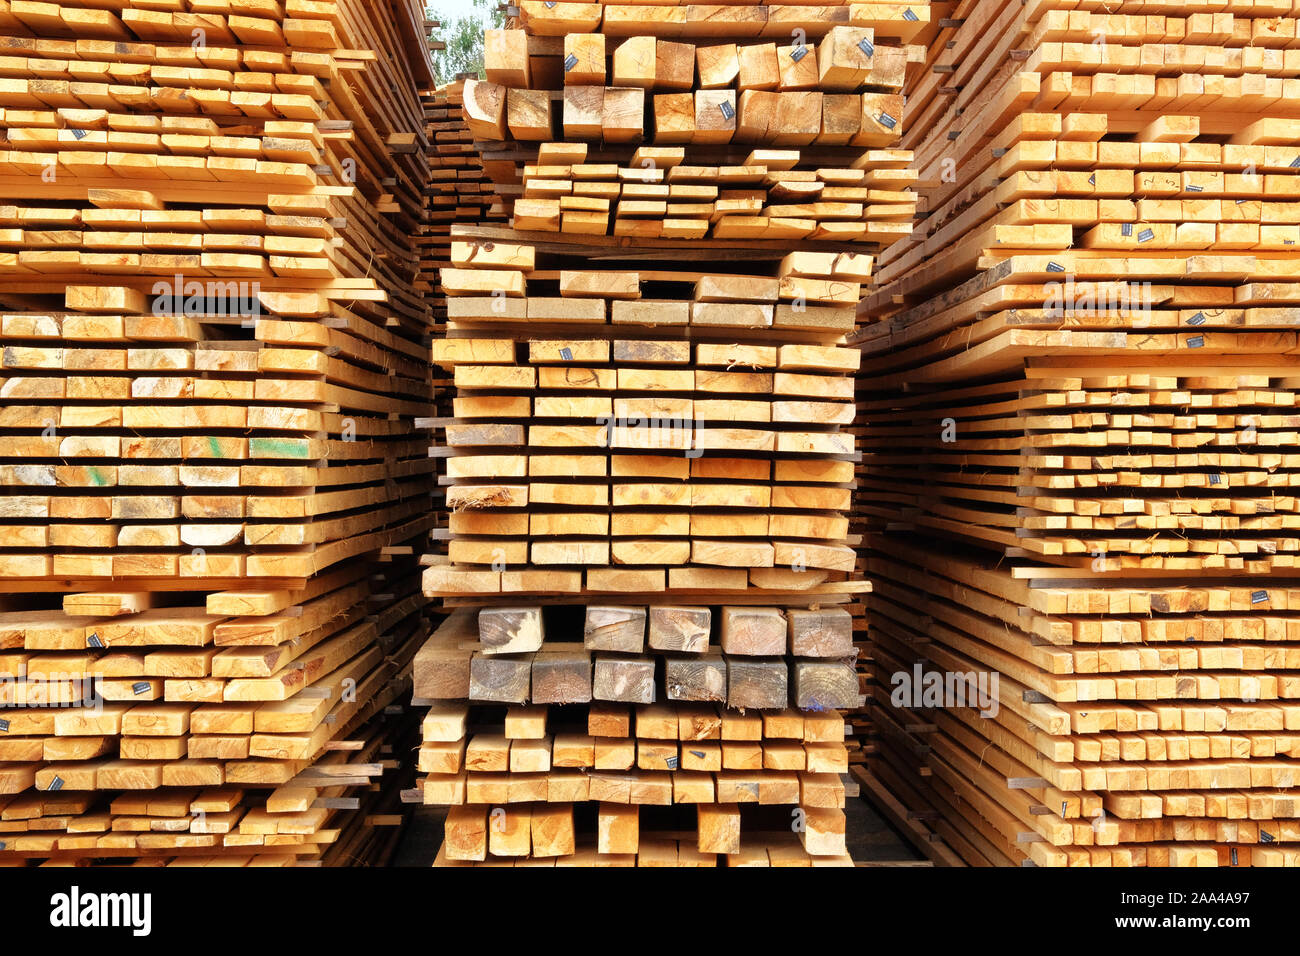 Stack of wooden bars. Pile of new wooden boards on a storage. Stock Photo